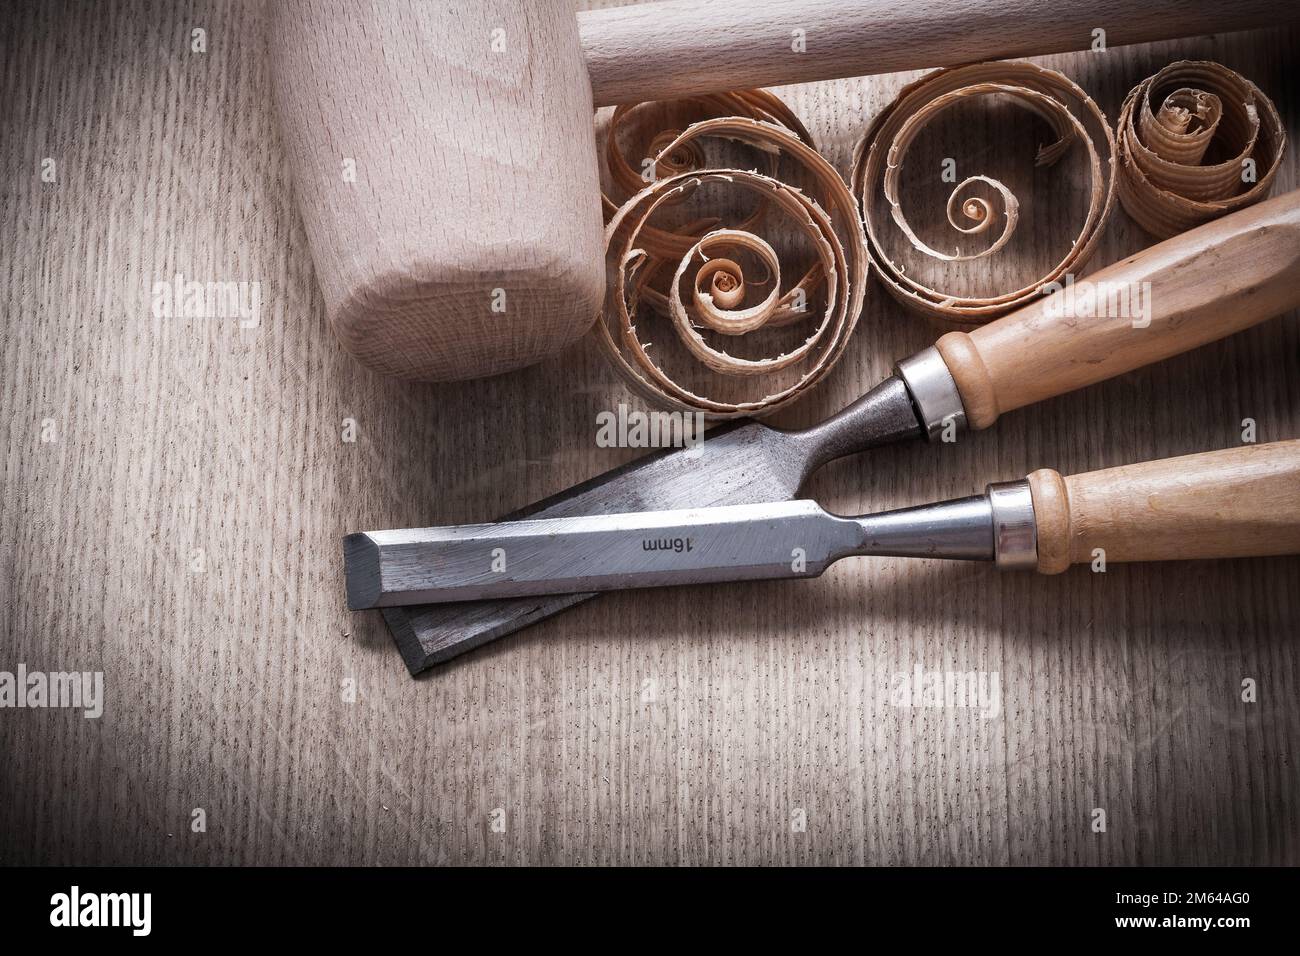 Wooden mallet scobs firmer chisels on wood surface horizontal view construction concept. Stock Photo